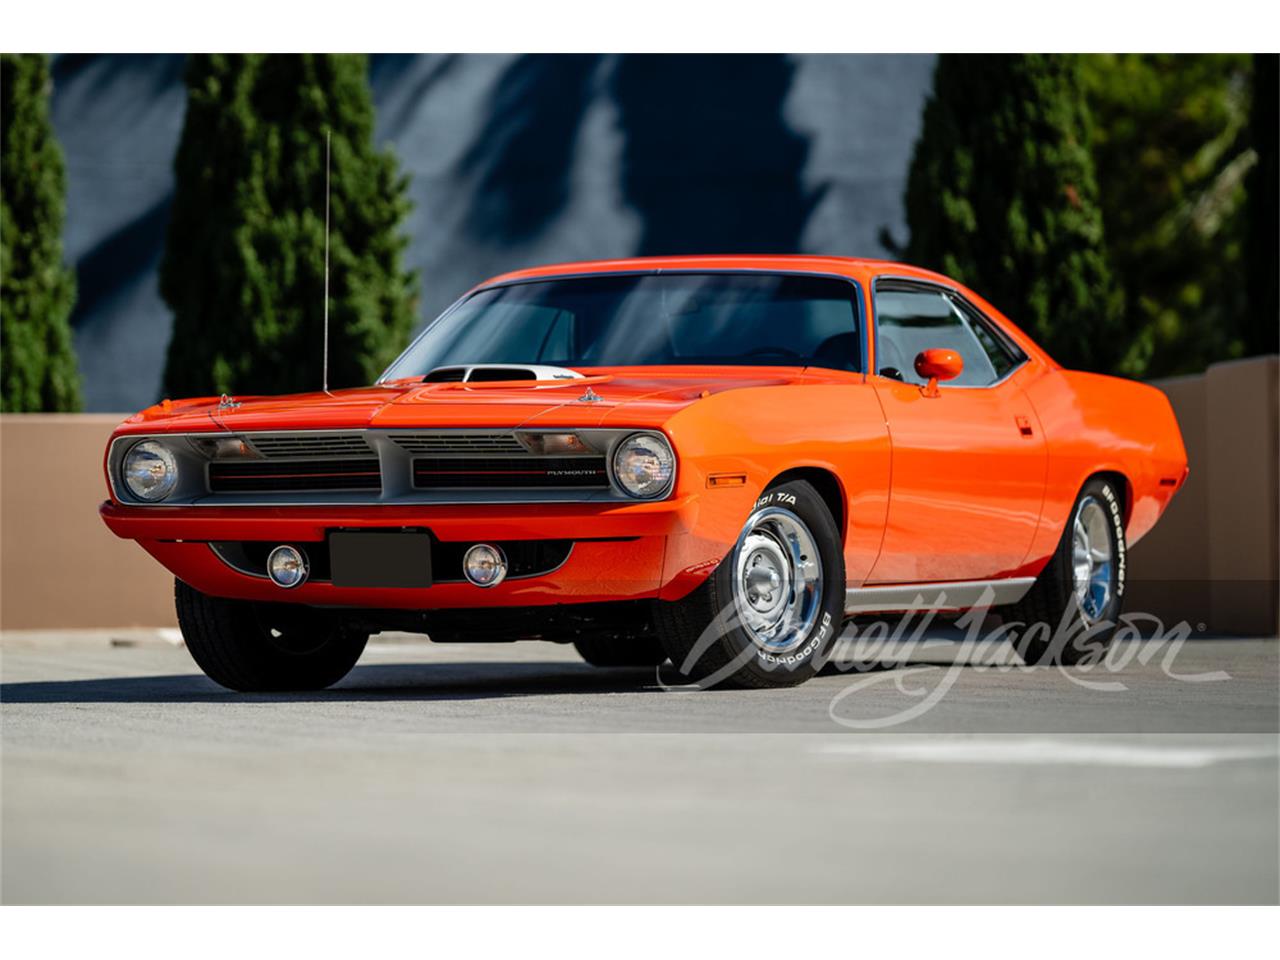 For Sale at Auction: 1970 Plymouth Barracuda in Scottsdale, Arizona for sale in Scottsdale, AZ